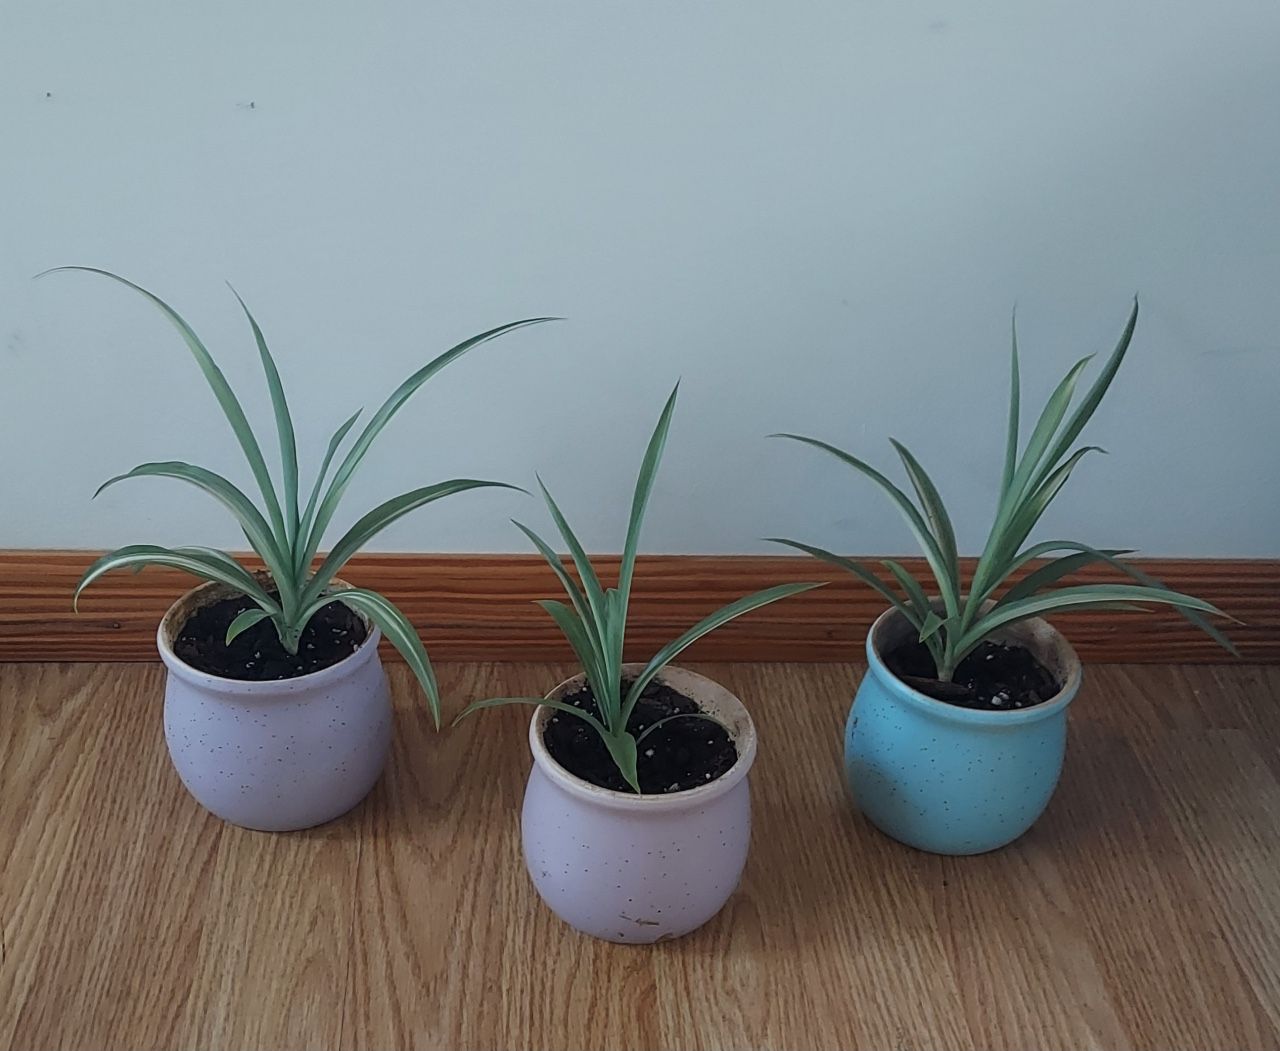 3 Spider Plants Great For Offices and Indoor Gardens. 